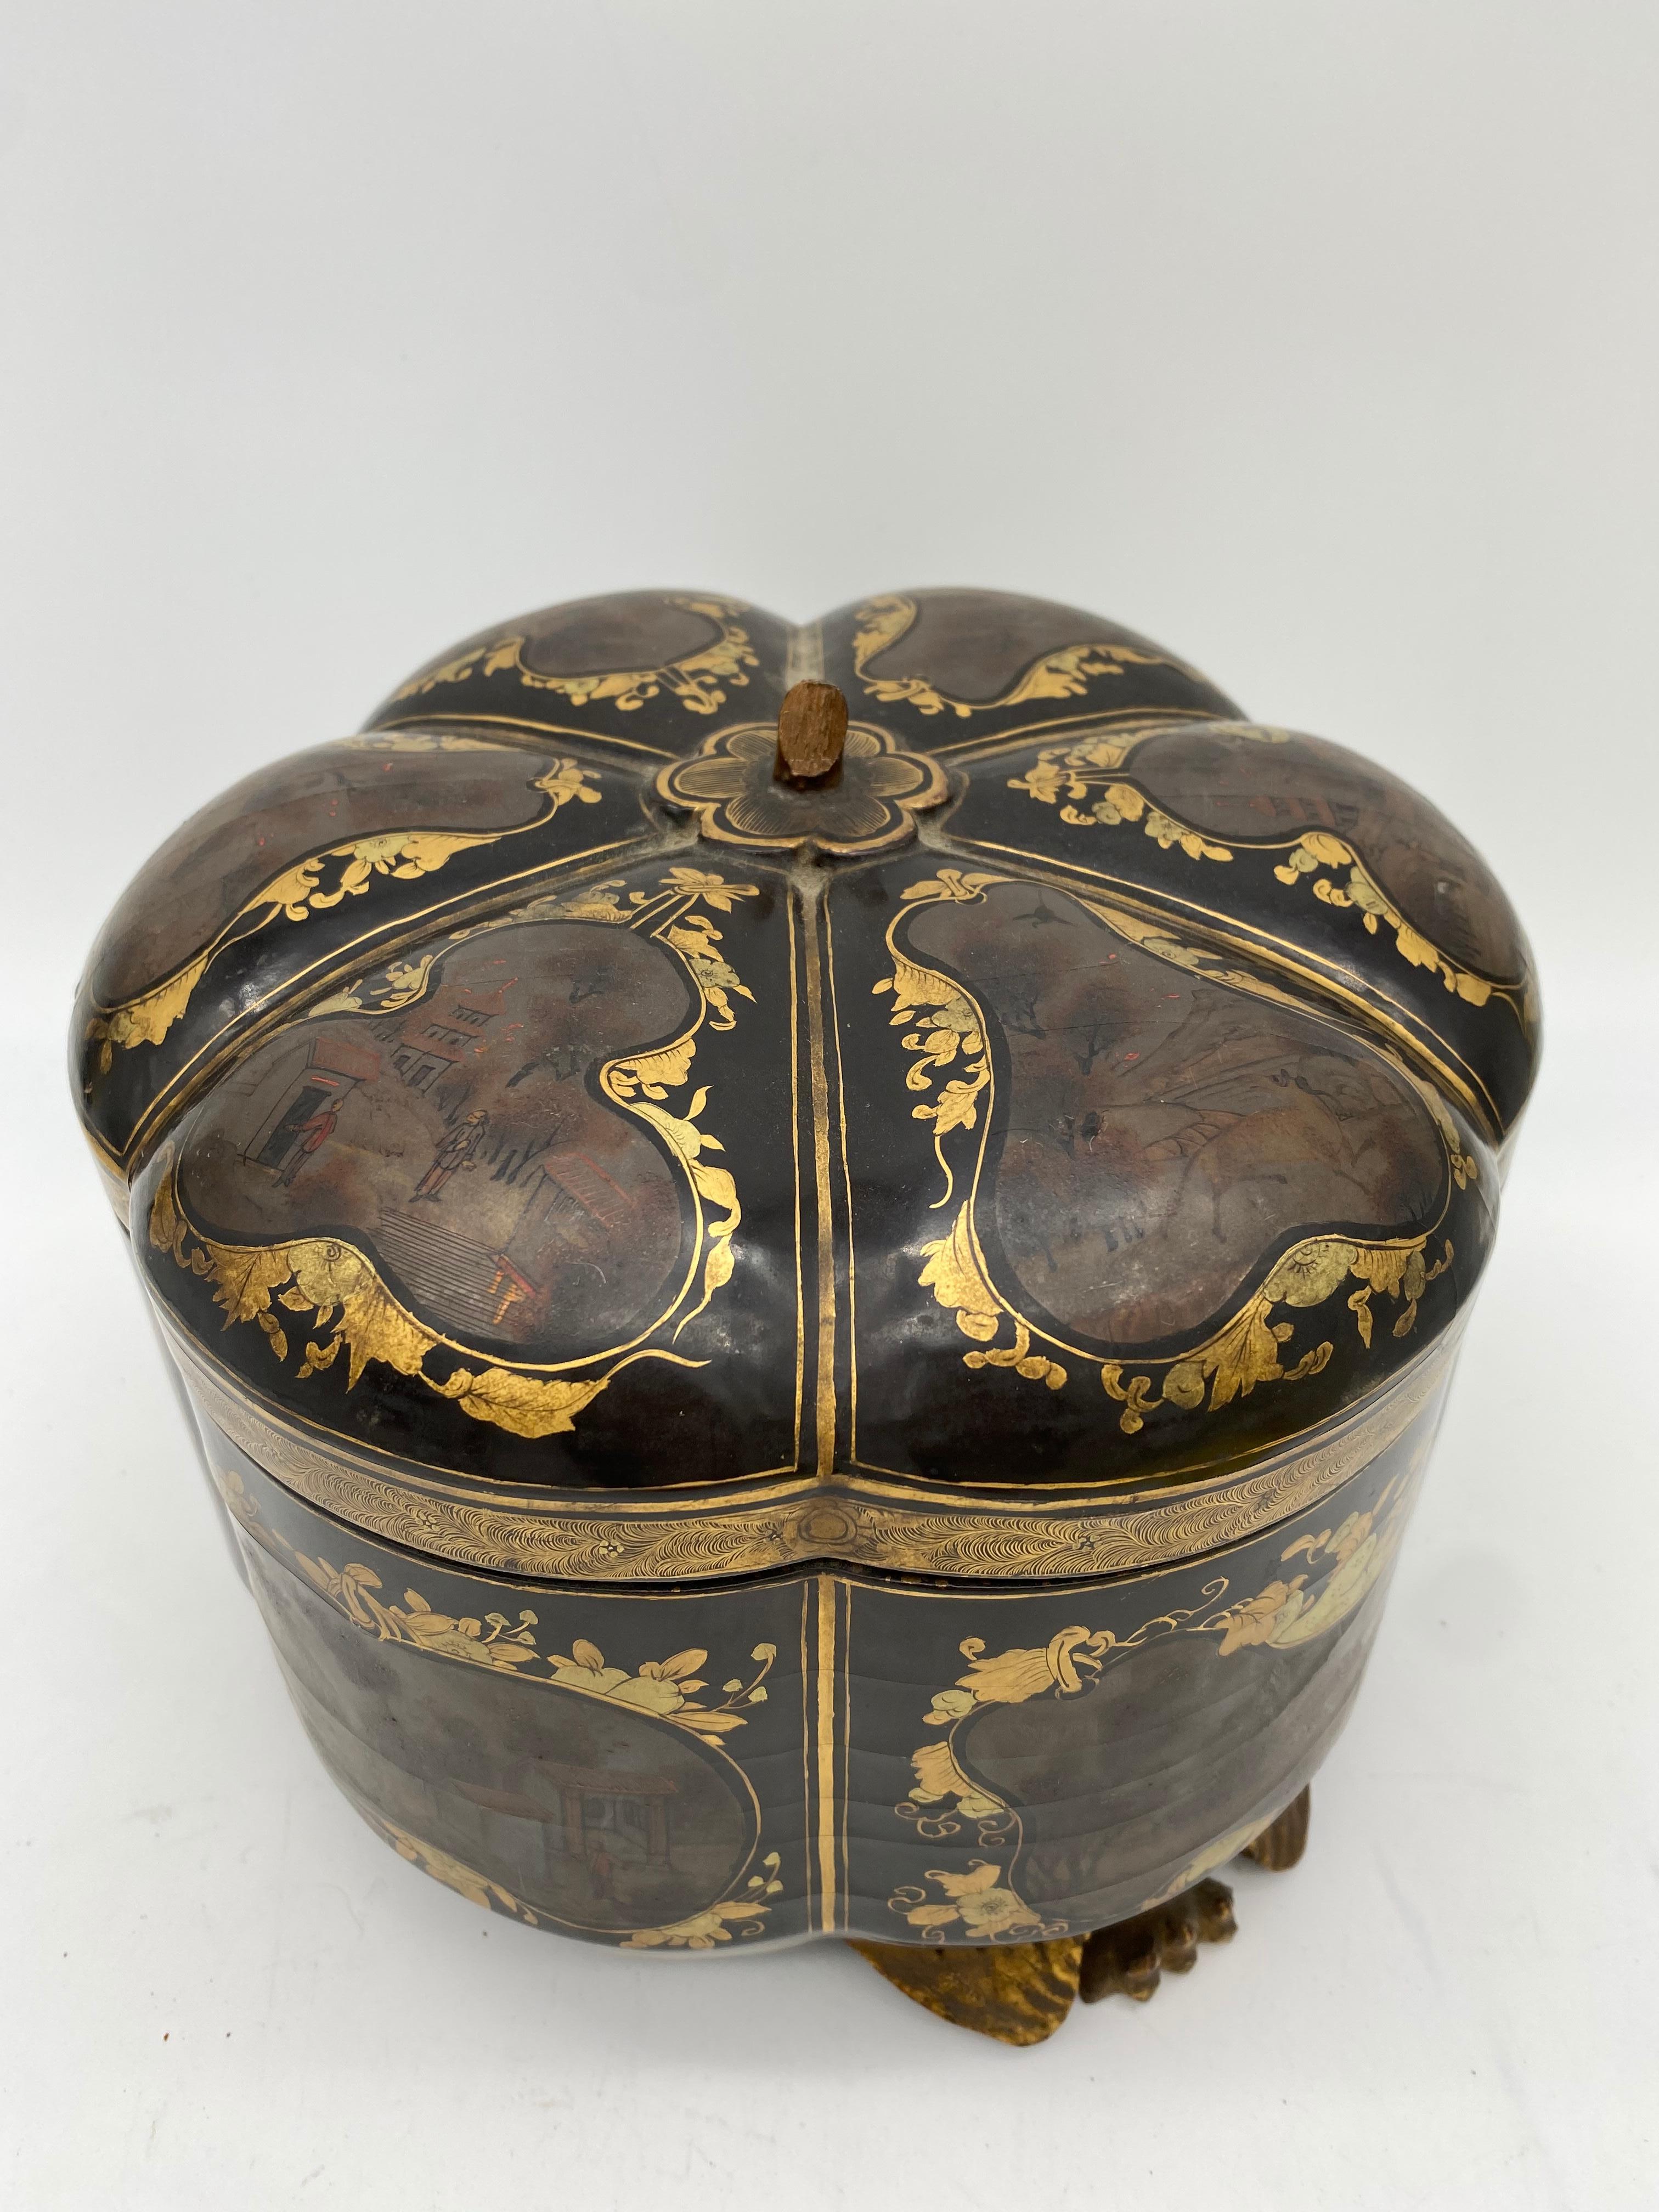 19th Century a Unique Gilt Chinese Lacquer Tea Caddy For Sale 4